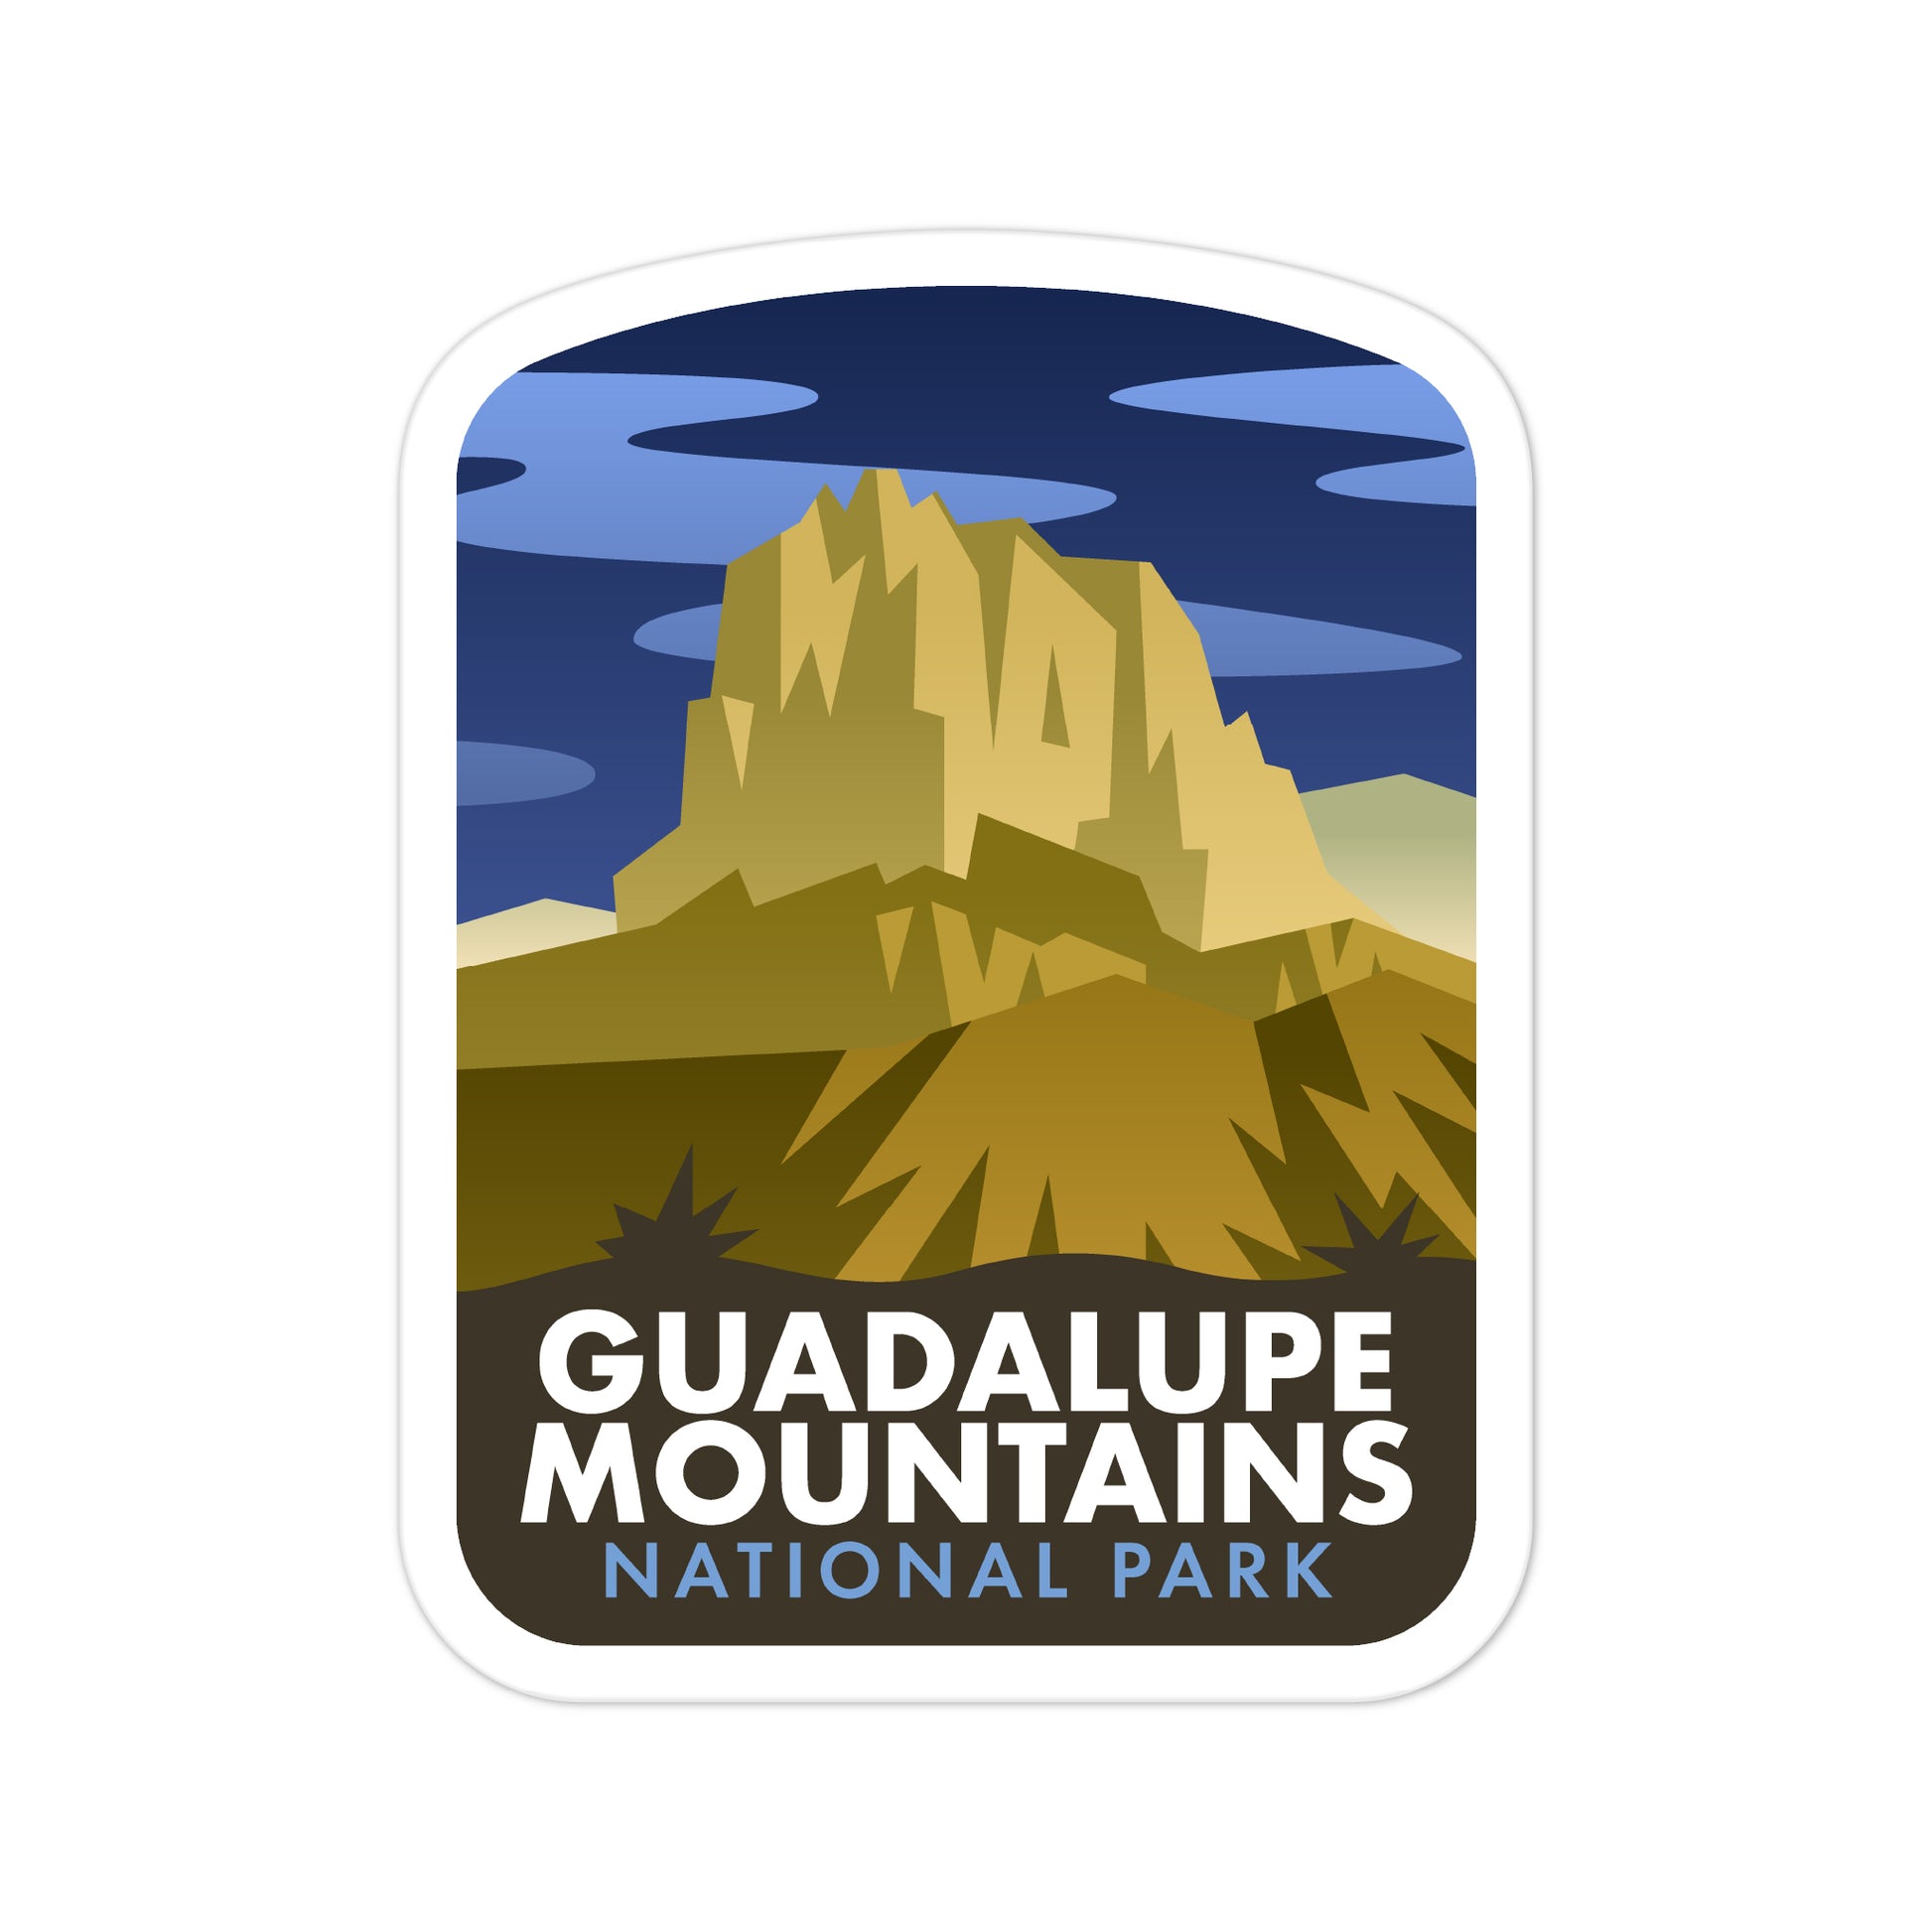 A sticker of Guadalupe Mountains National Park